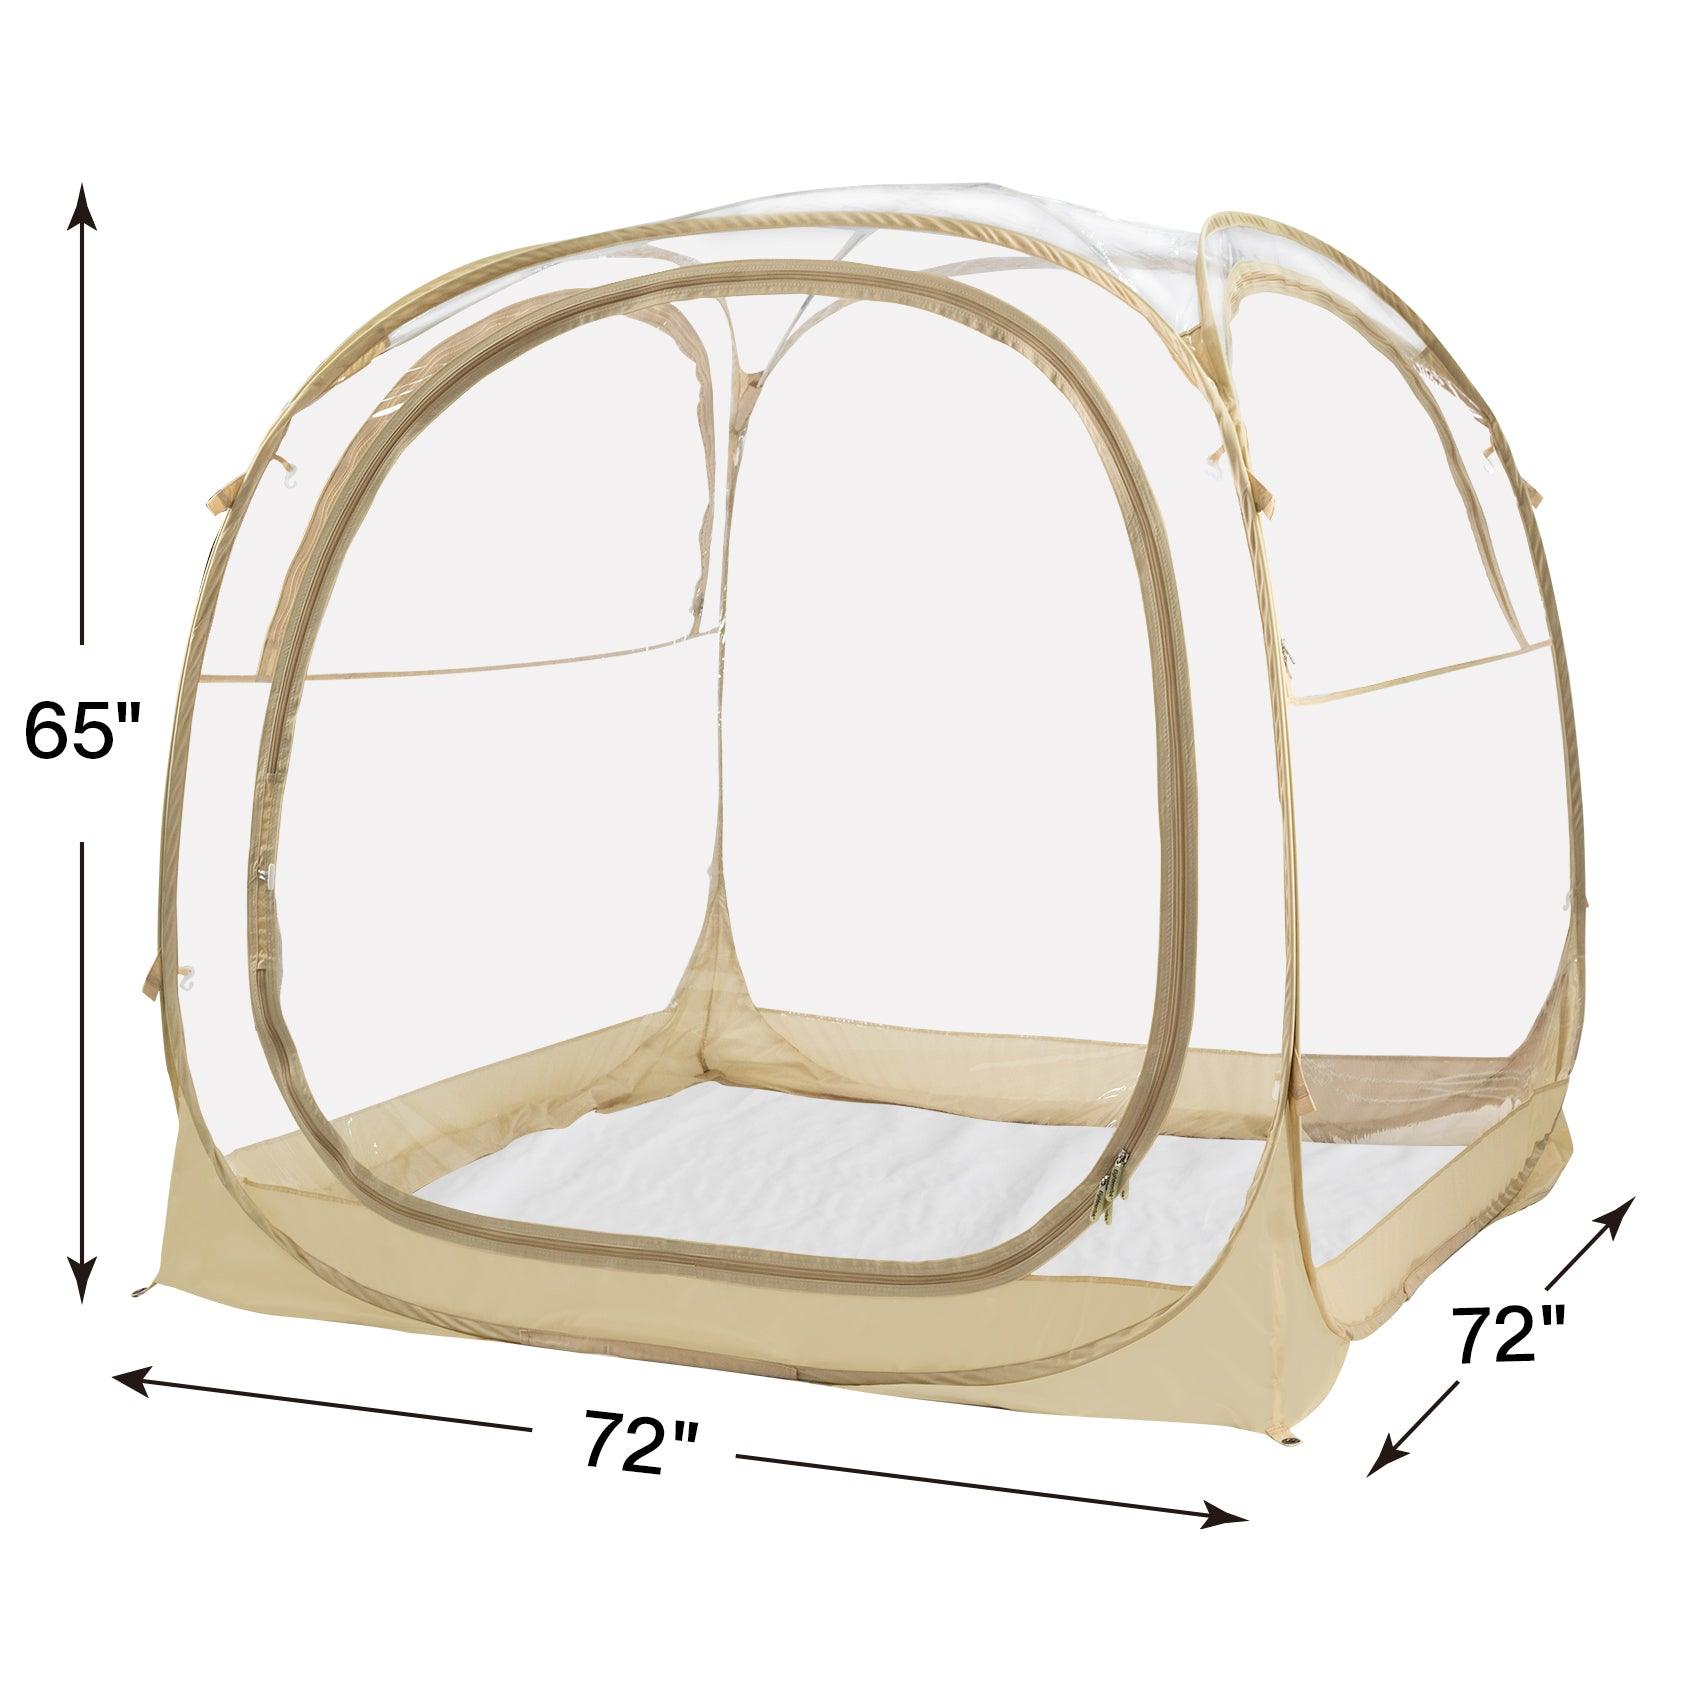 EighteenTek Pop-up Tent for up to 6 People, Perfect family pods for outdoor events.